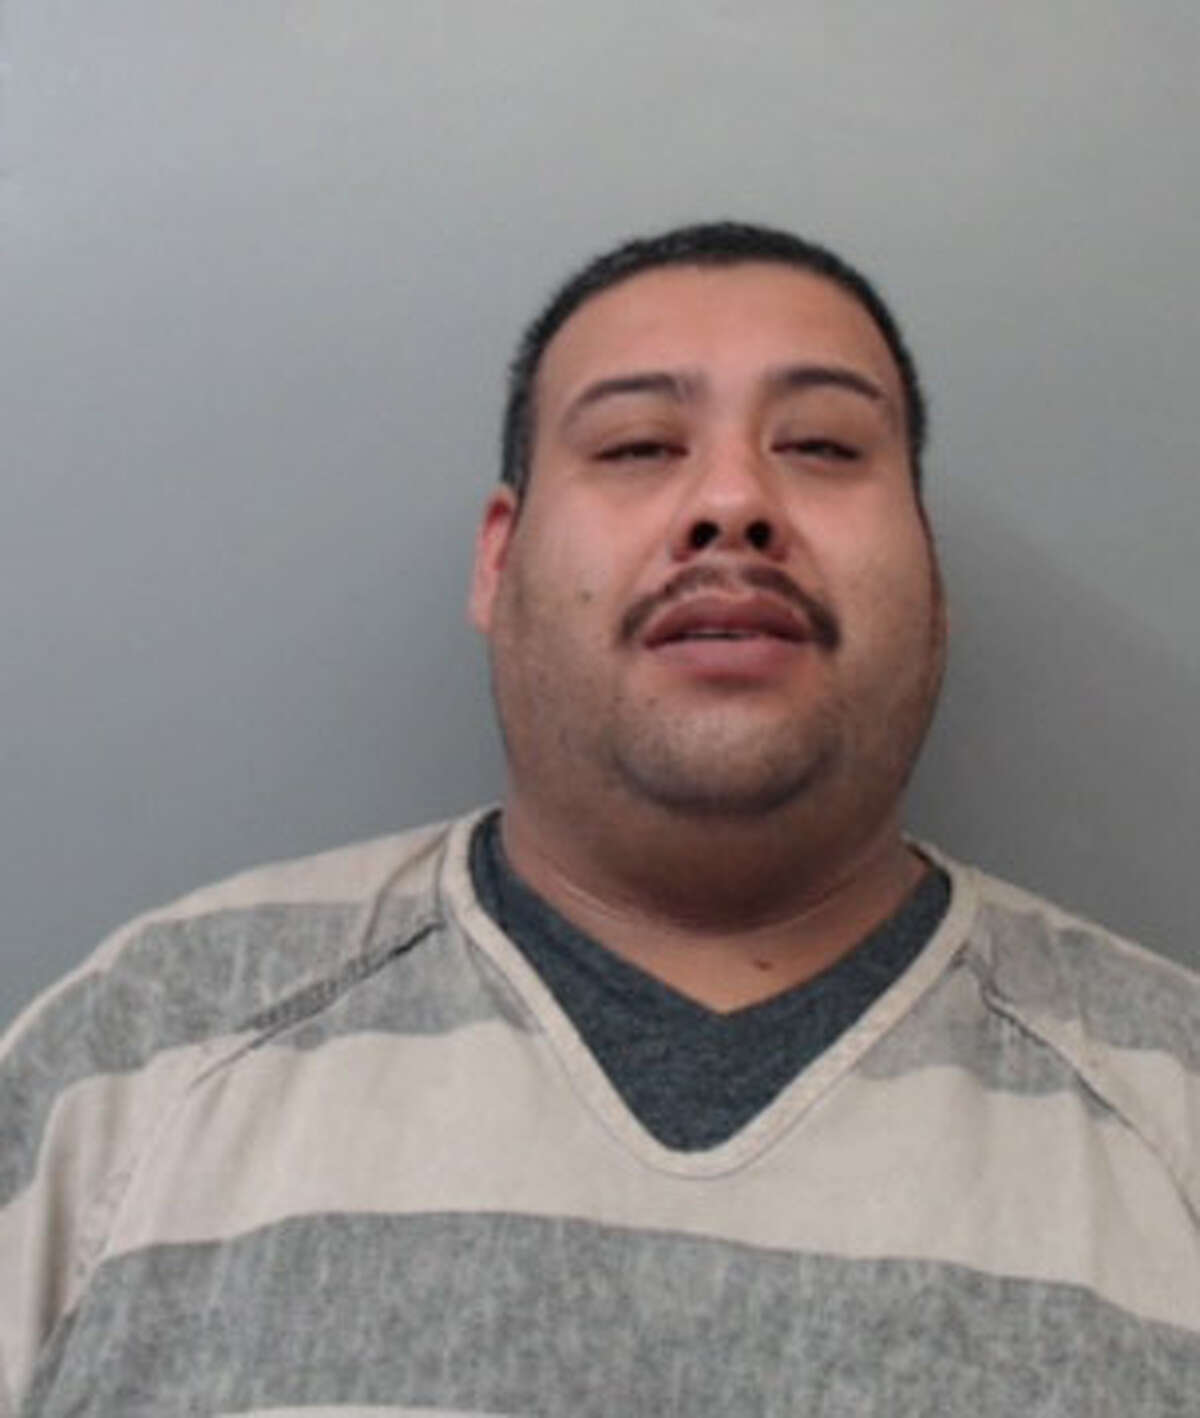 Manuel Antonio Chavez, 29, was charged with three counts of accident involving injury.